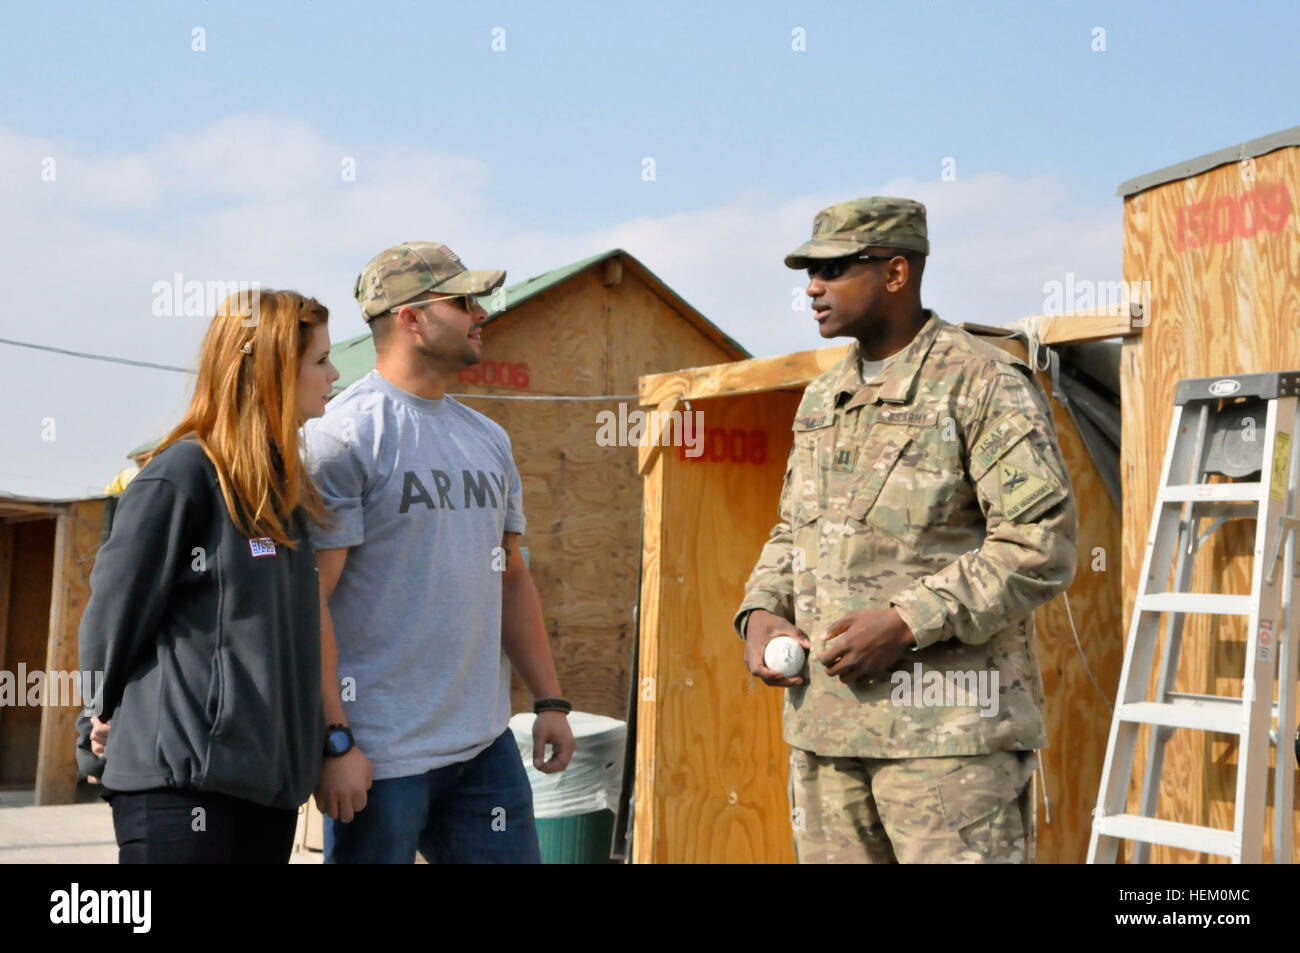 LOGAR PROVINCE, Afghanistan – Actress JoAnna Garcia Swisher and New York Yankees fielder Nick Swisher listen as Capt. Michael A. Miller, a native of Buffalo, New York and commander of C Medical Company, 125th Brigade Support Battalion, describes his company’s medical facilities at Forward Operating Base Shank, Afghanistan, Friday, Nov. 25. The celebrity couple greeted troops and signed autographs as part of a USO tour. (U.S. Army photo by Maj. Terence M. Kelley) Nick and JoAnna Swisher visit FOB Shank 492101 Stock Photo